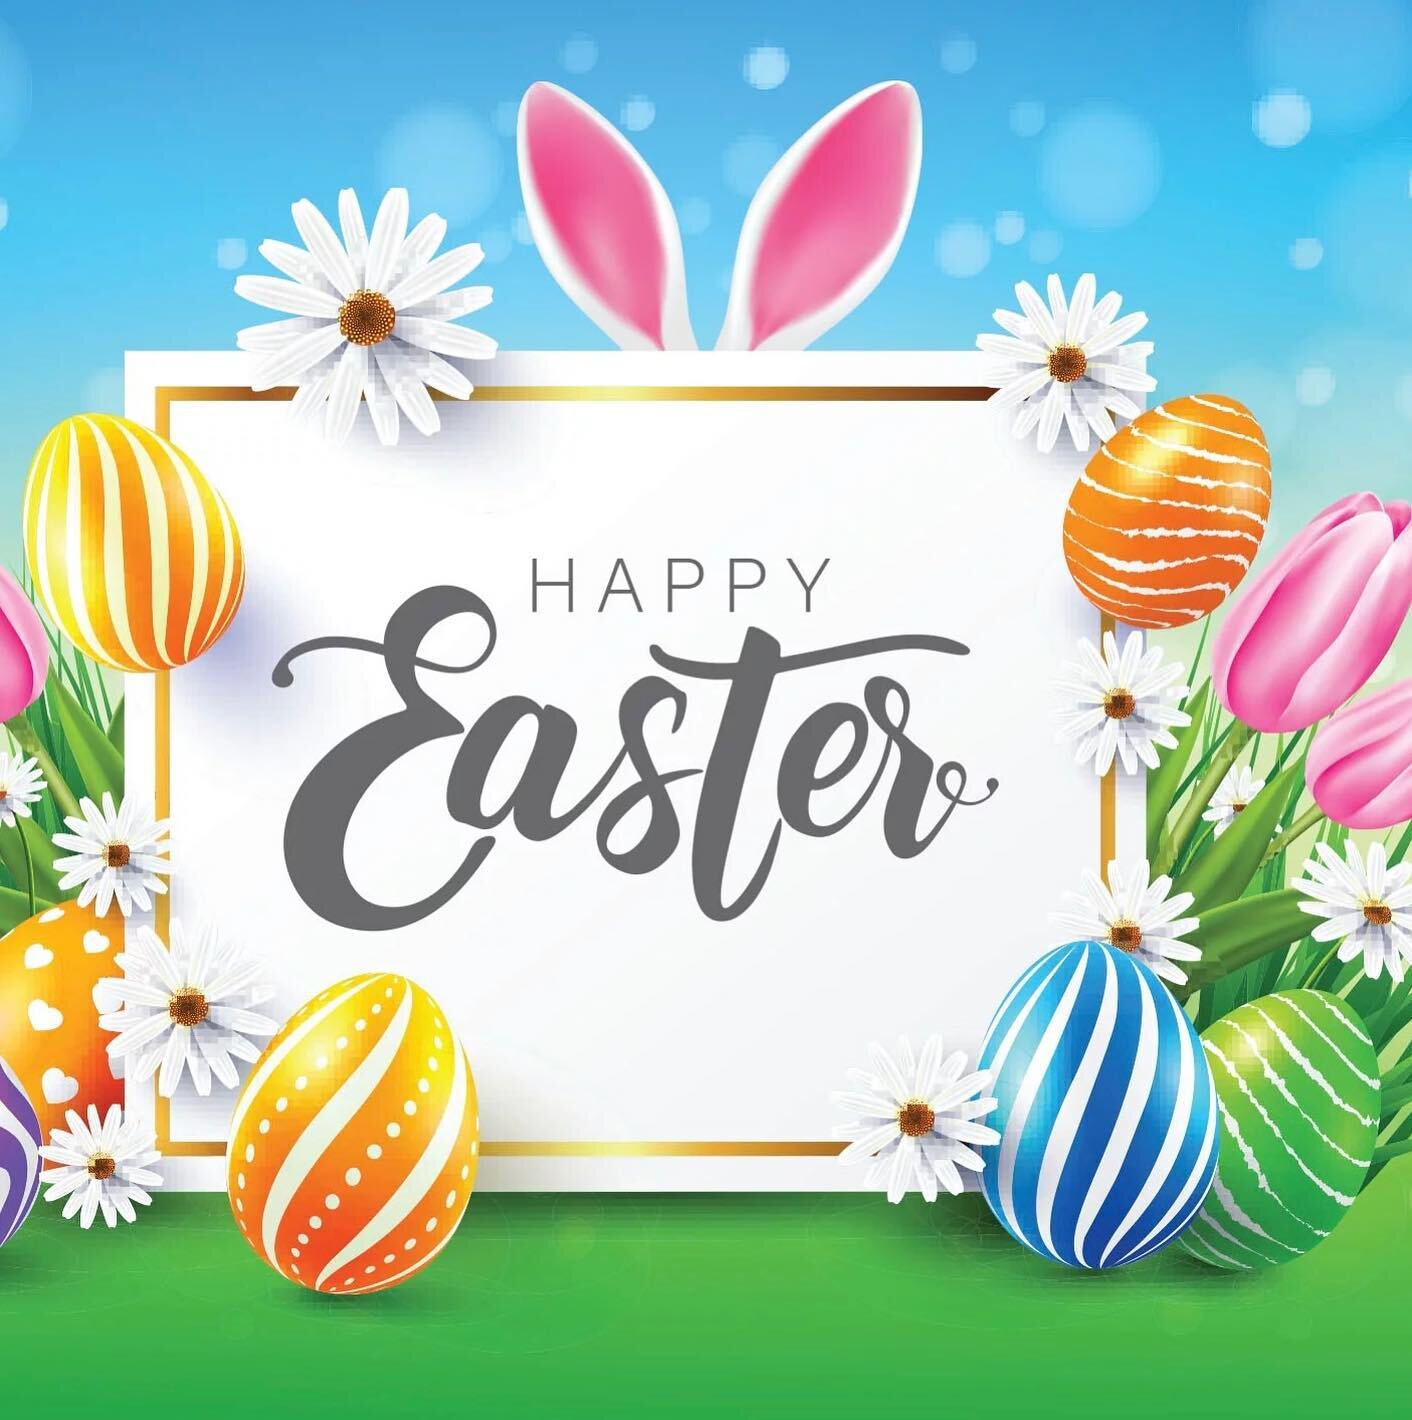 Happy Easter to Everyone! #eastersunday